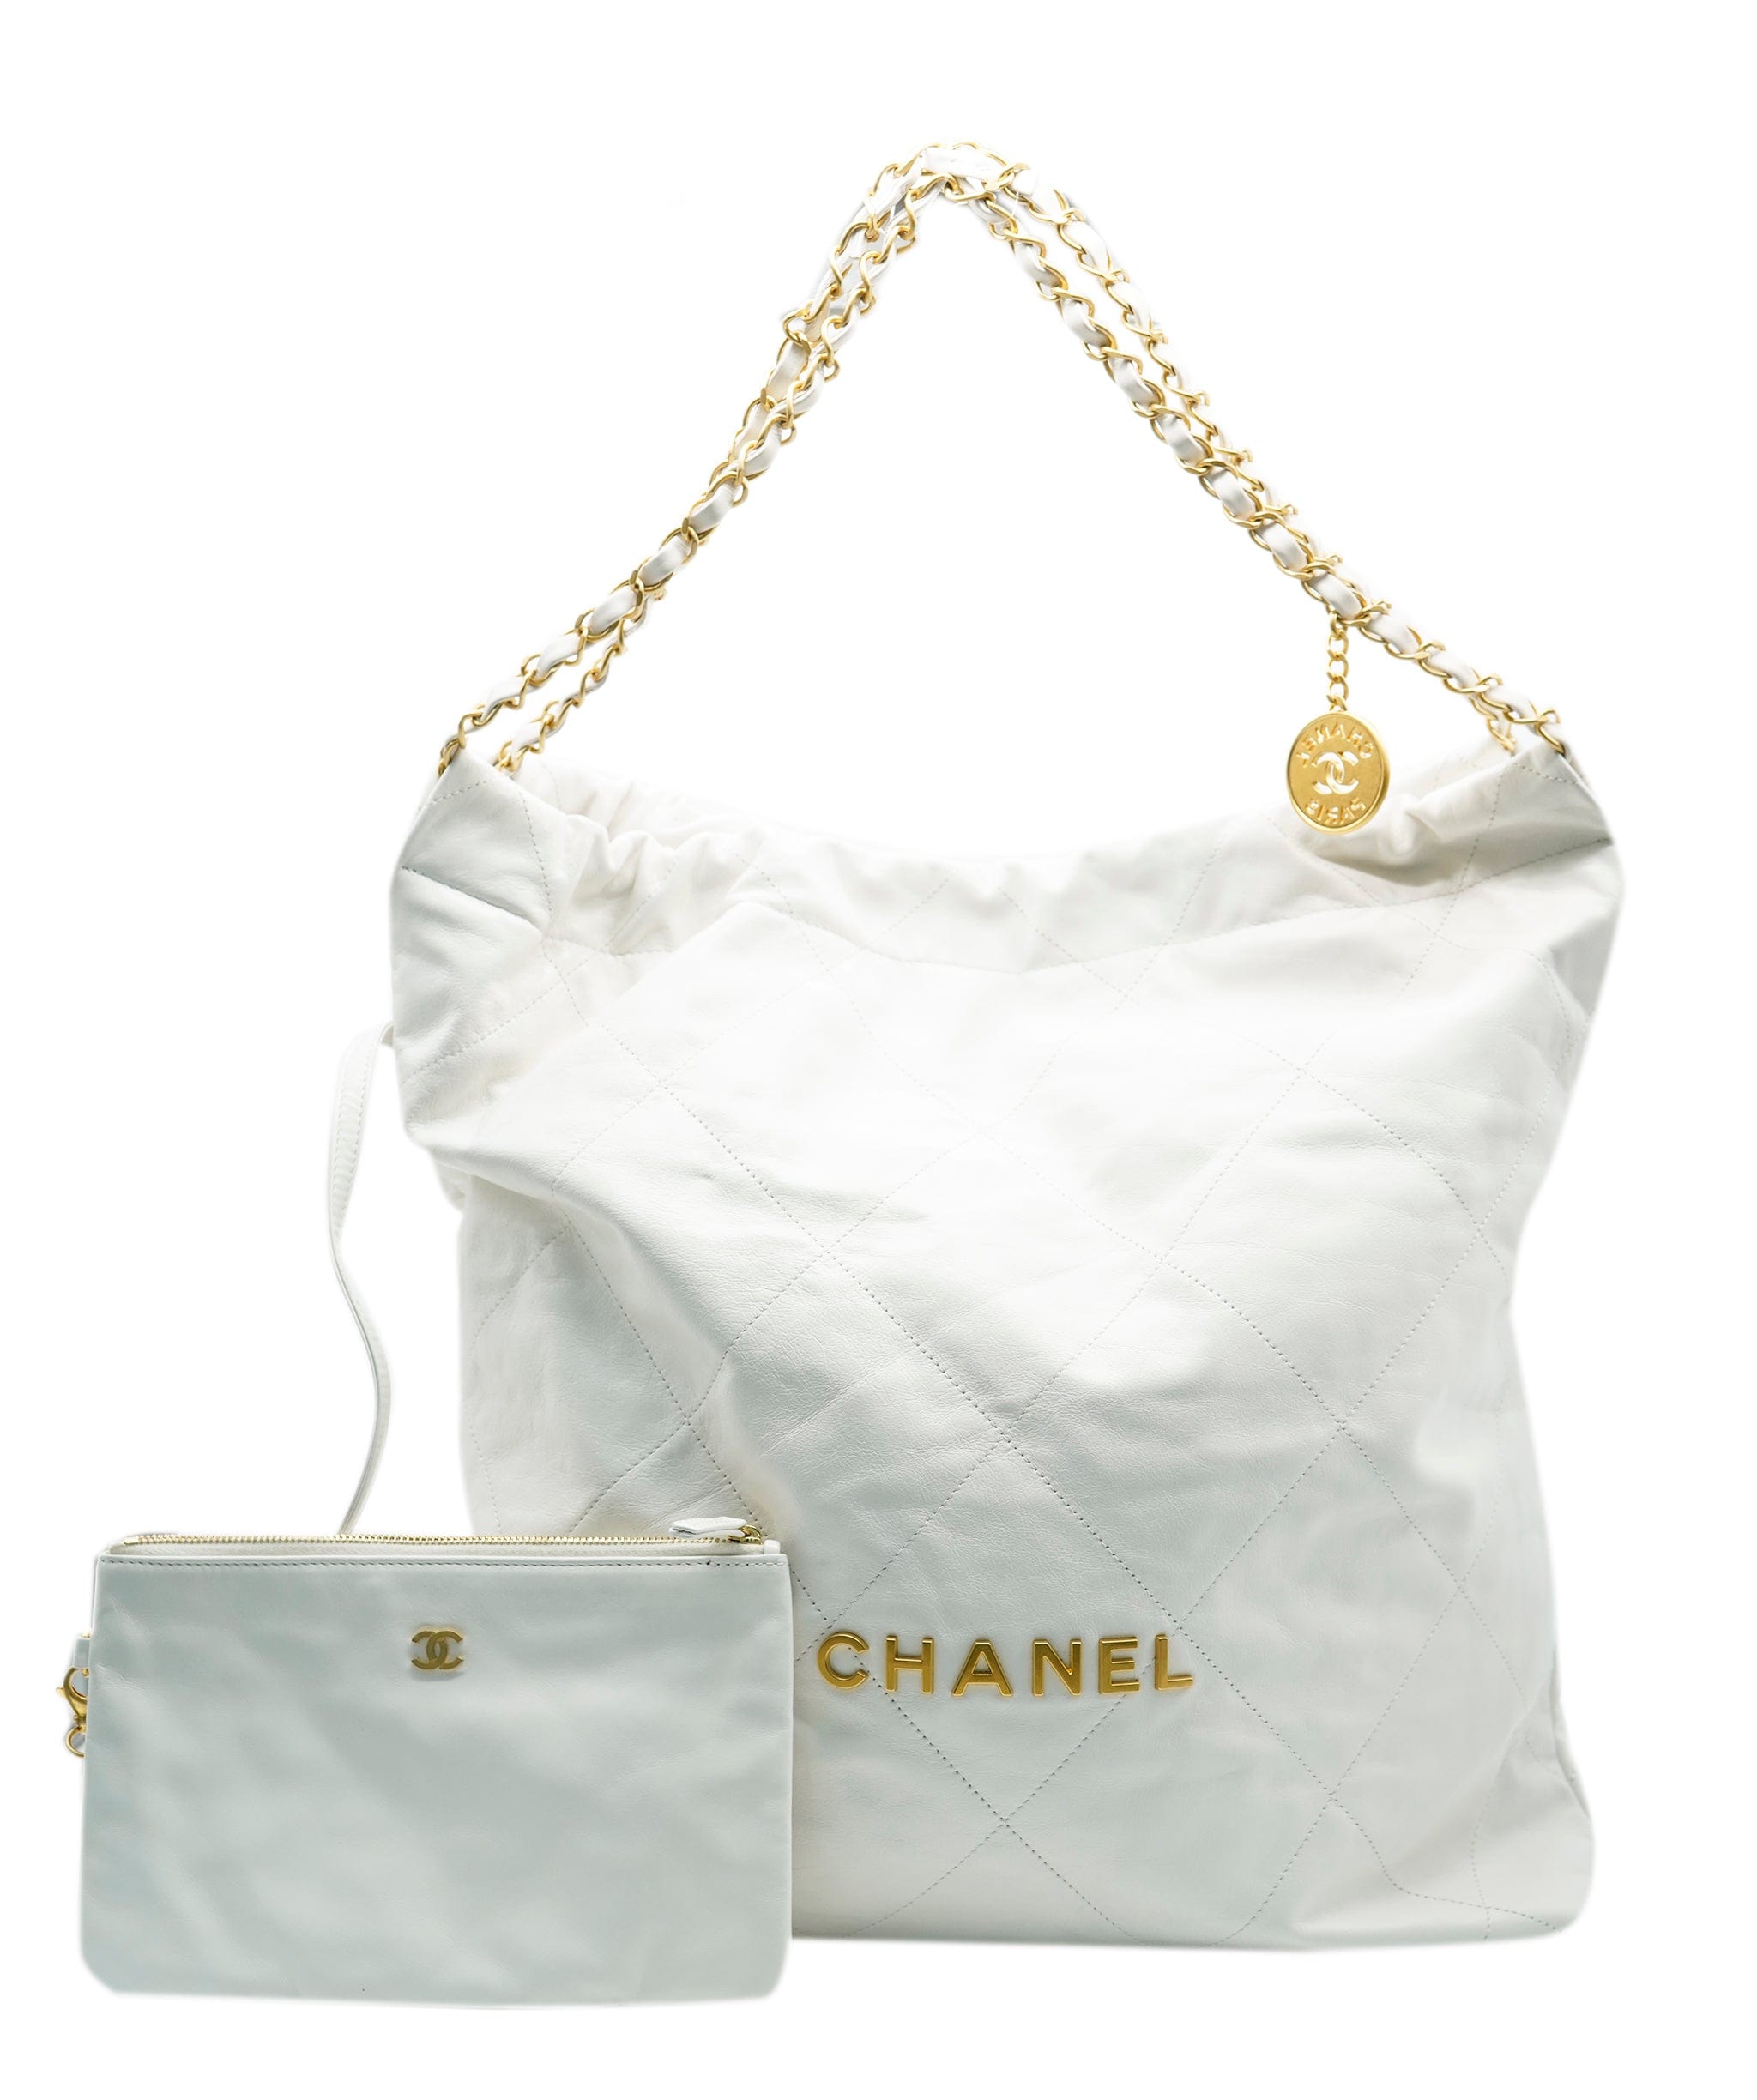 chanel Chanel Flap Chain Shoulder Bag in Multi - Ivory. Size all.